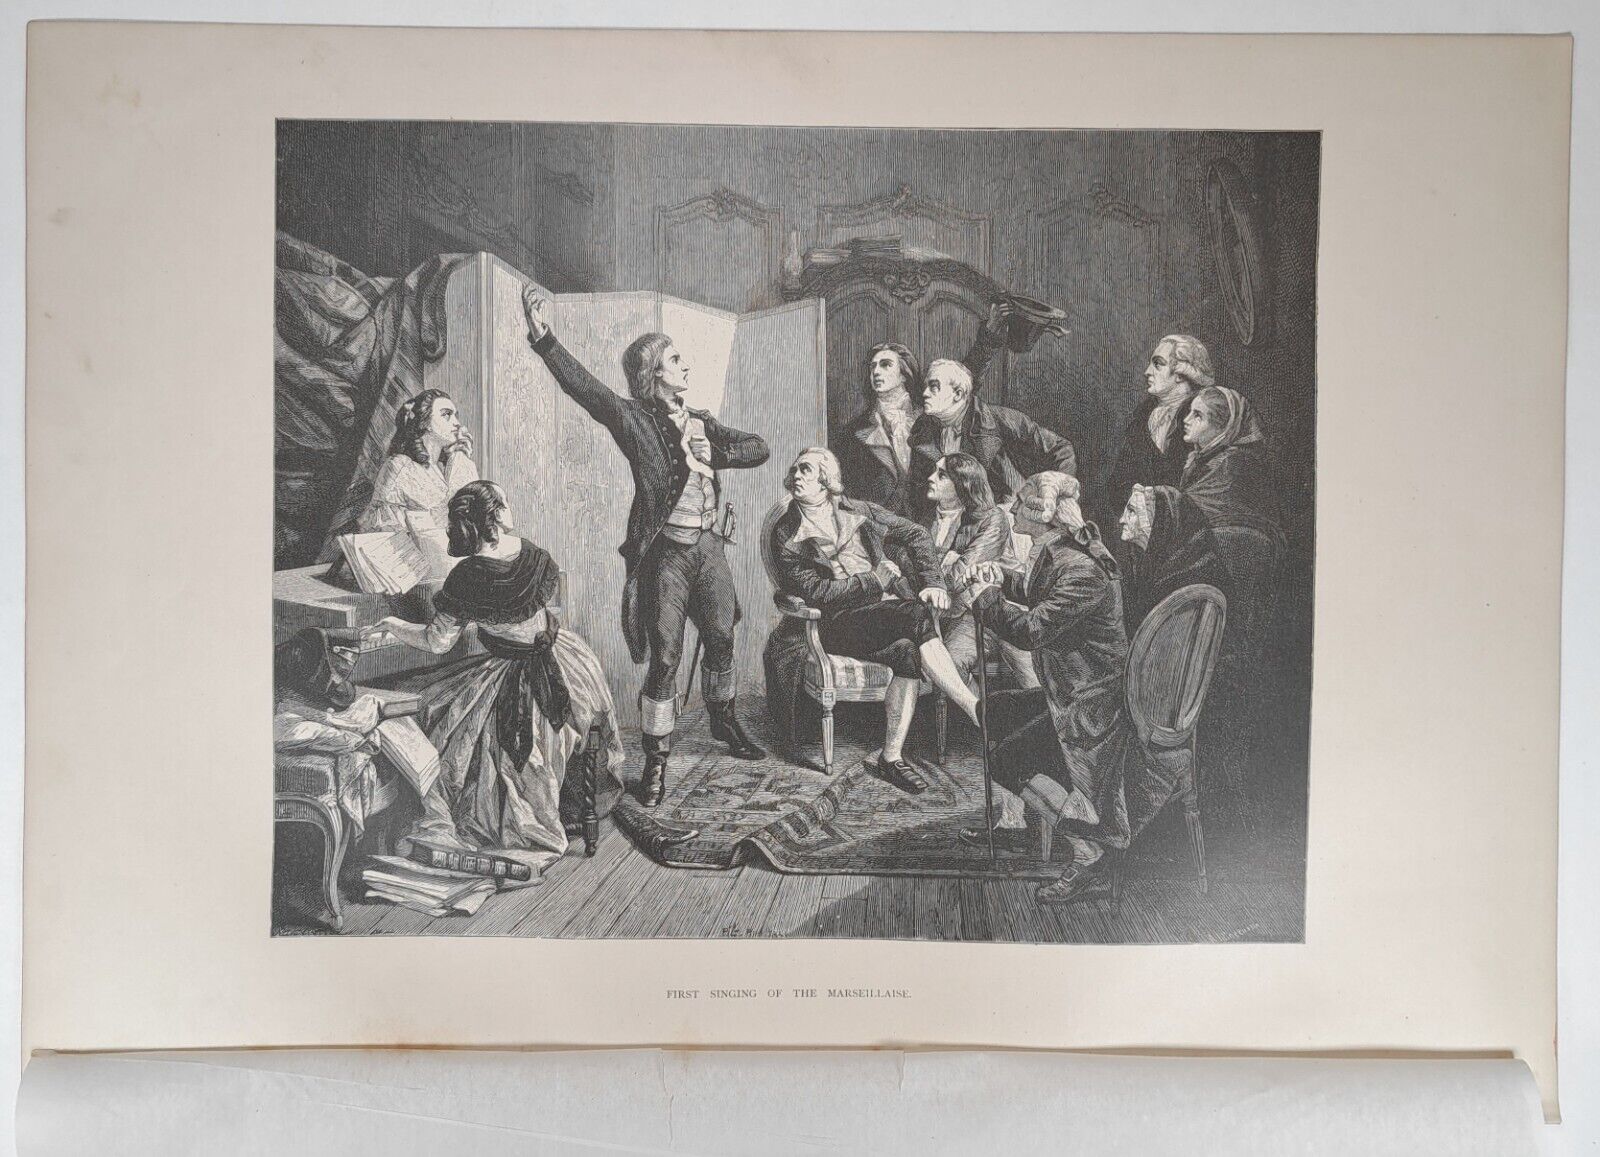 1876 Victorian Art Engraving, First Singing of The Marseillaise, French Anthem